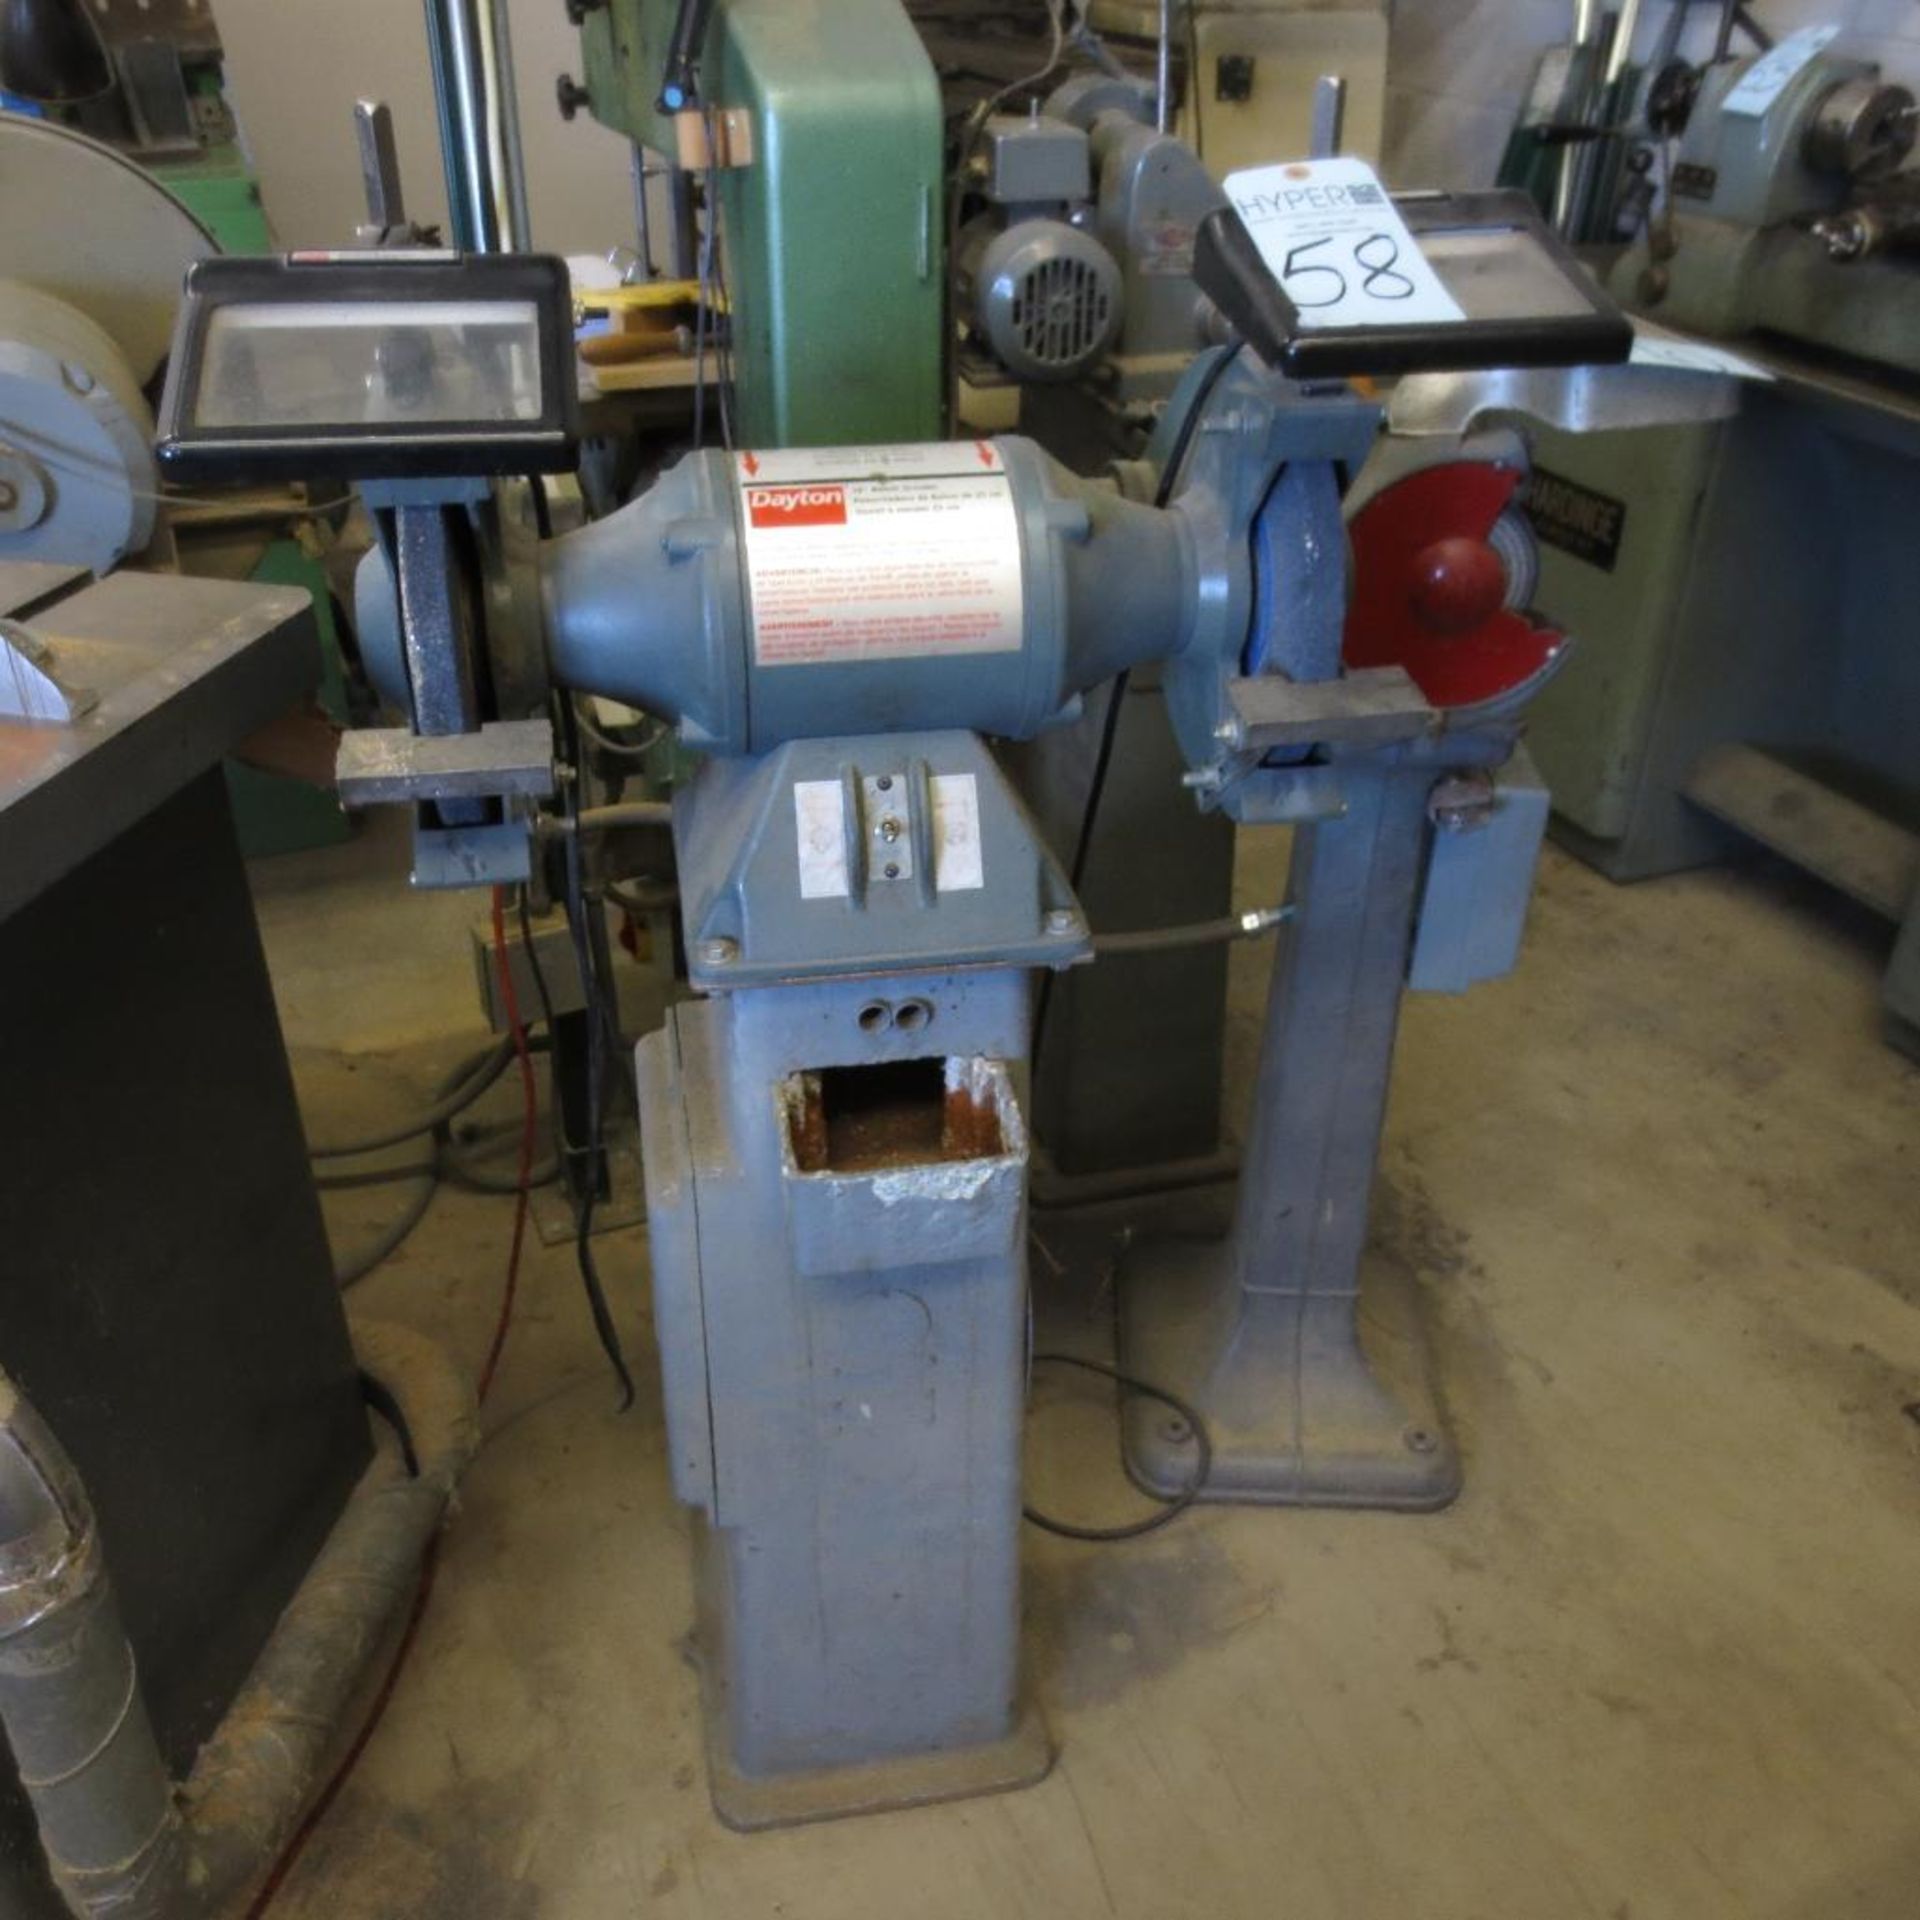 Dayton 10" Double End Bench Grinder, LOCATED AT 1850 Howard Street, Unit A Elk Grove Village, IL